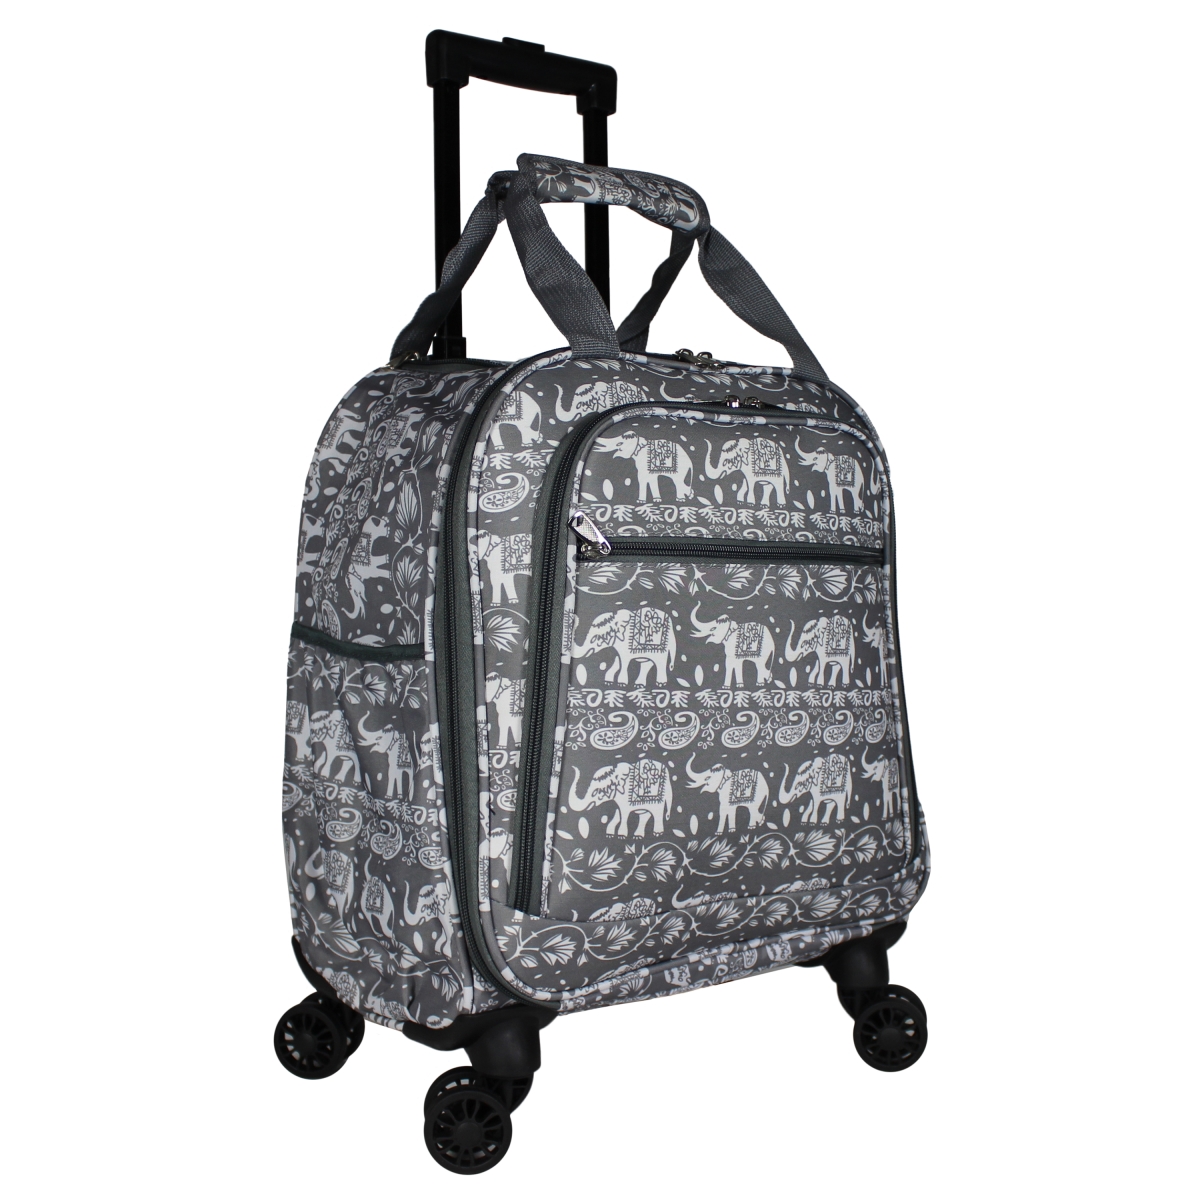 815501-227-grey-w 18 In. Prints Spinner Carry-on Luggage, Grey White Elephant